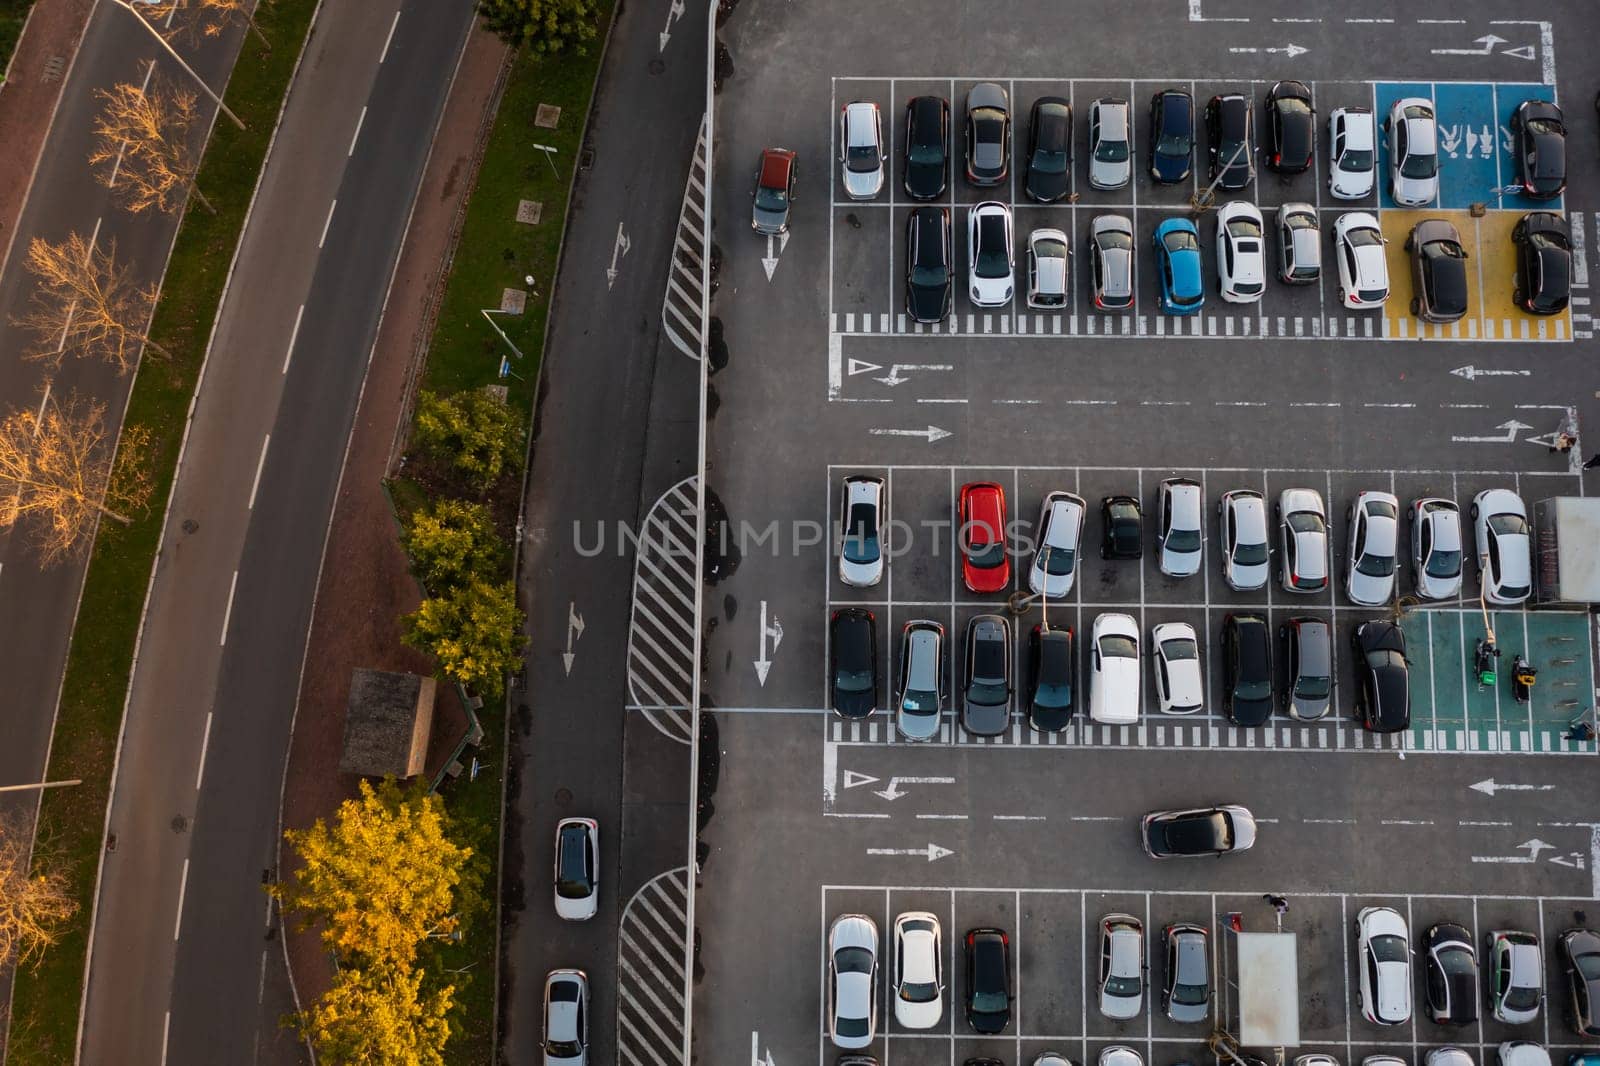 Aerial view of large car parking with many parked cars. Car park near shopping mall with lines and markings for vehicle places and directions